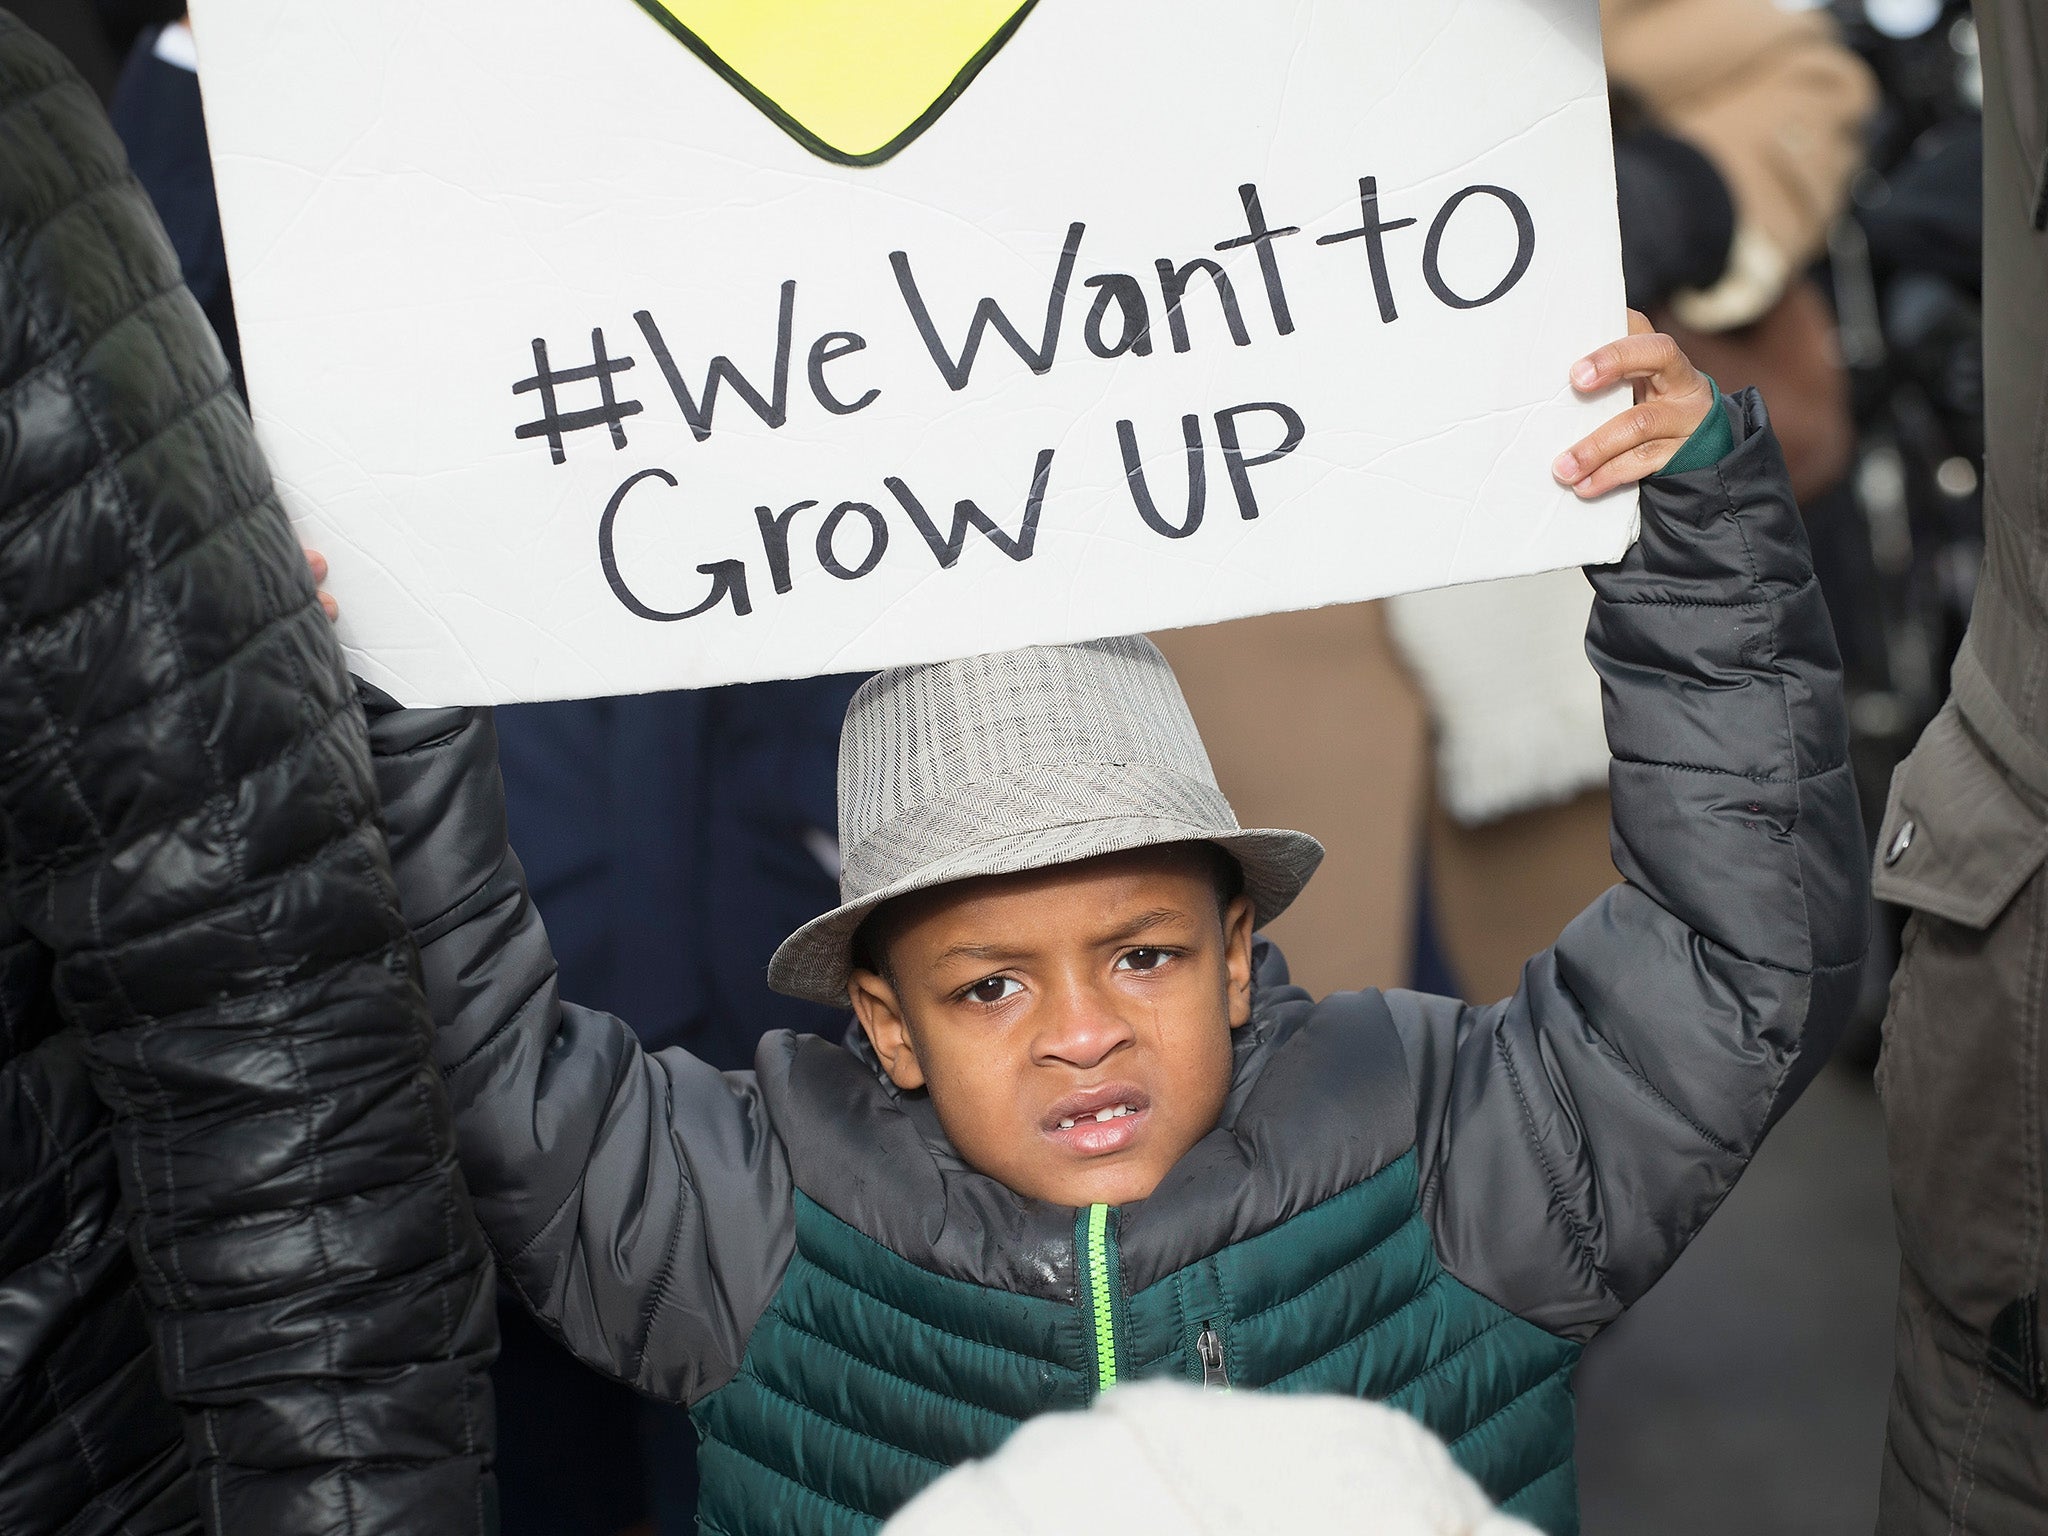 A young boy attends a Chicago gun violence protest in December 2015